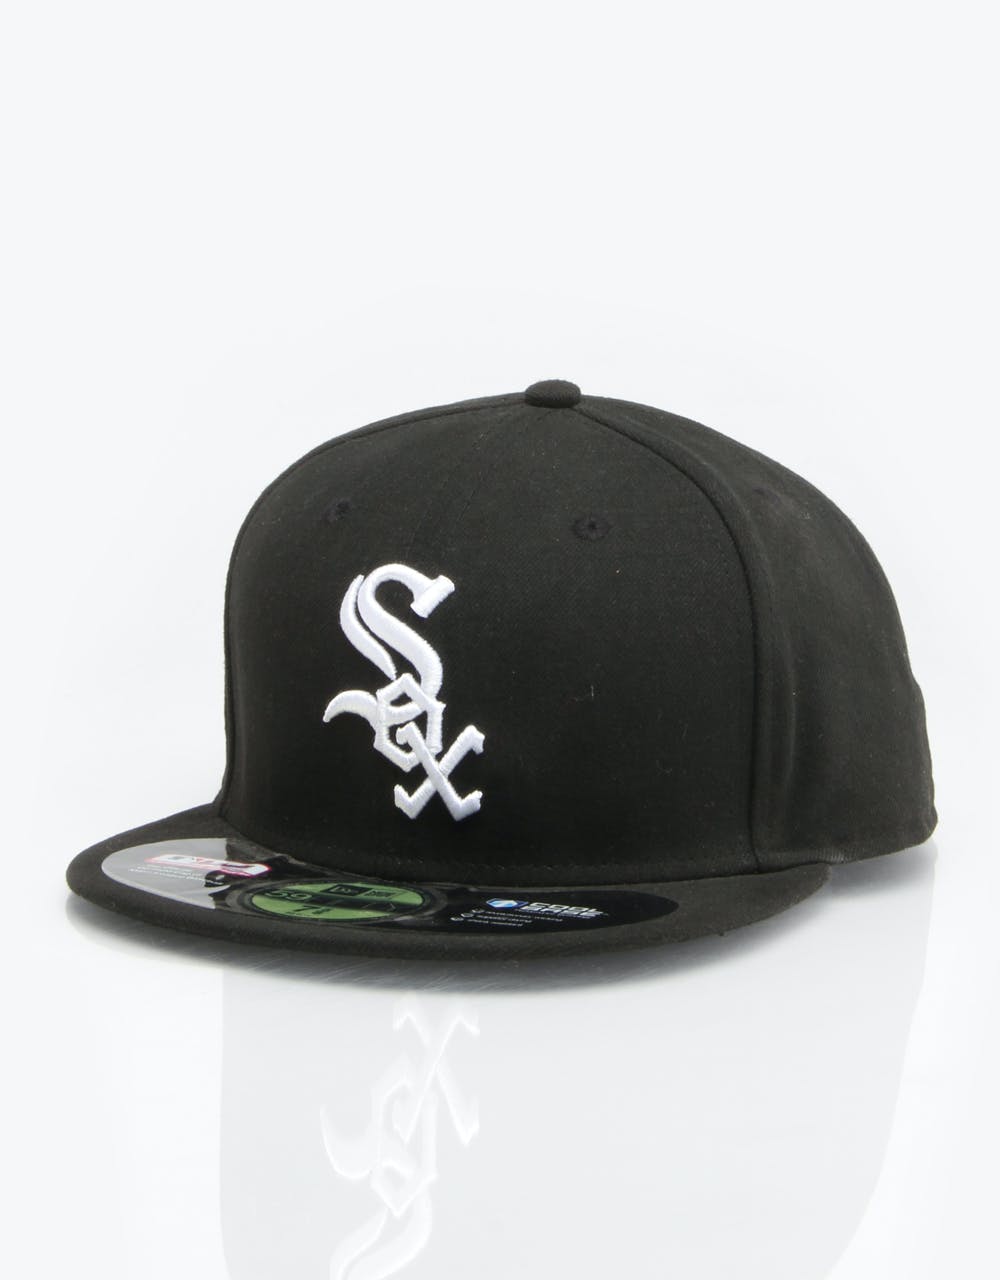 New Era MLB Chicago White Sox Authentic Fitted Cap - Black